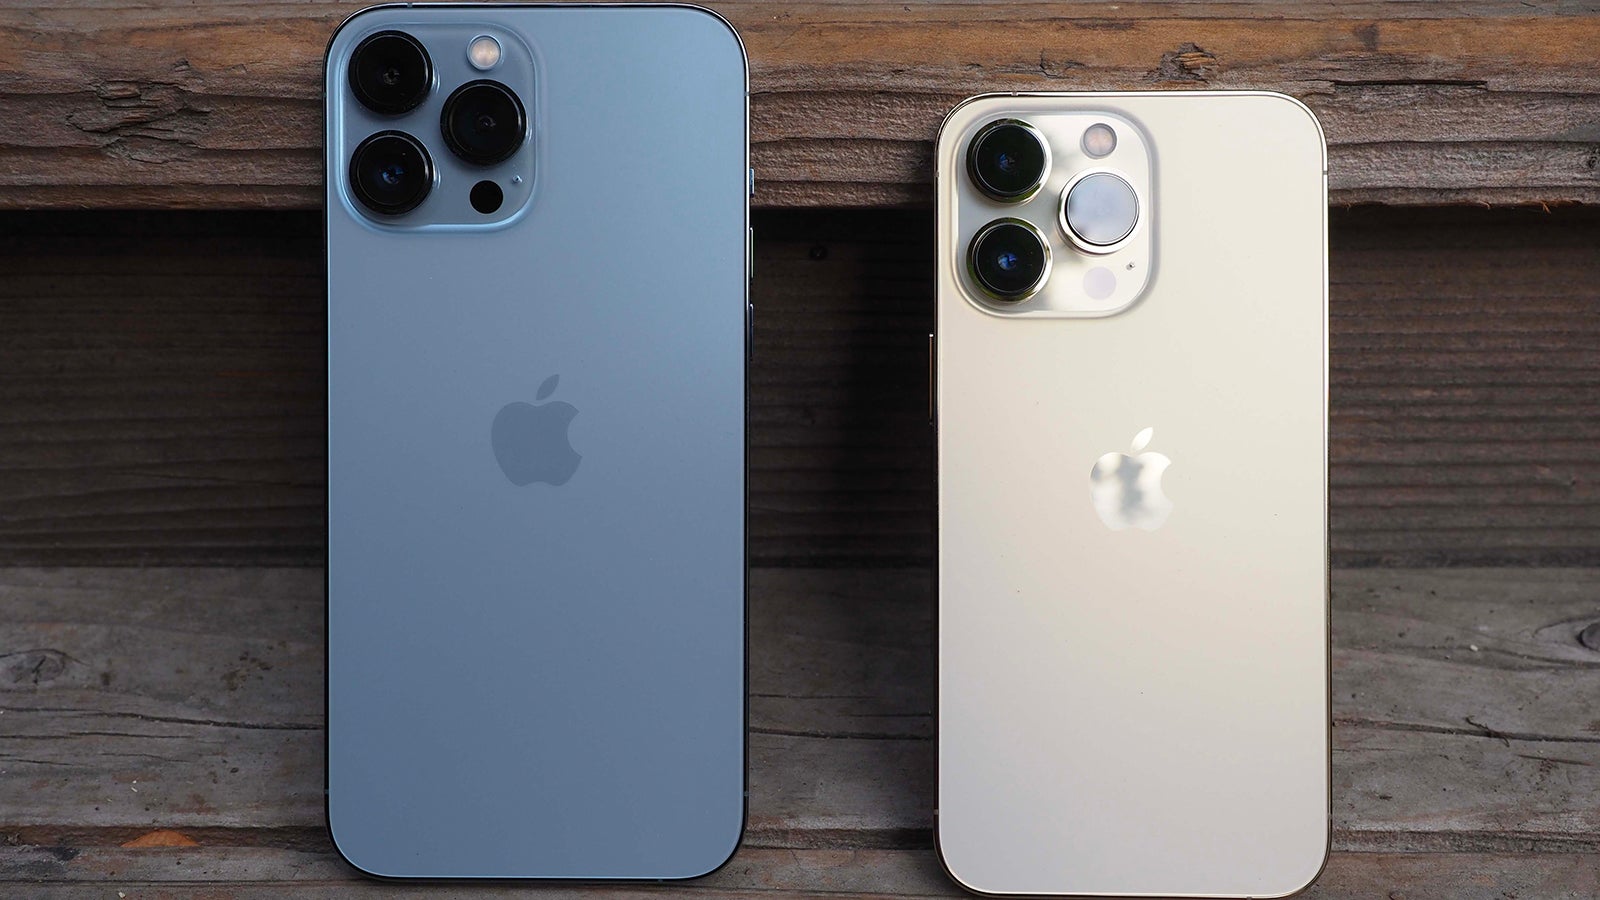 The iPhone 13 Pro Max and the iPhone 13 Pro. (Photo: Caitlin McGarry/Gizmodo)